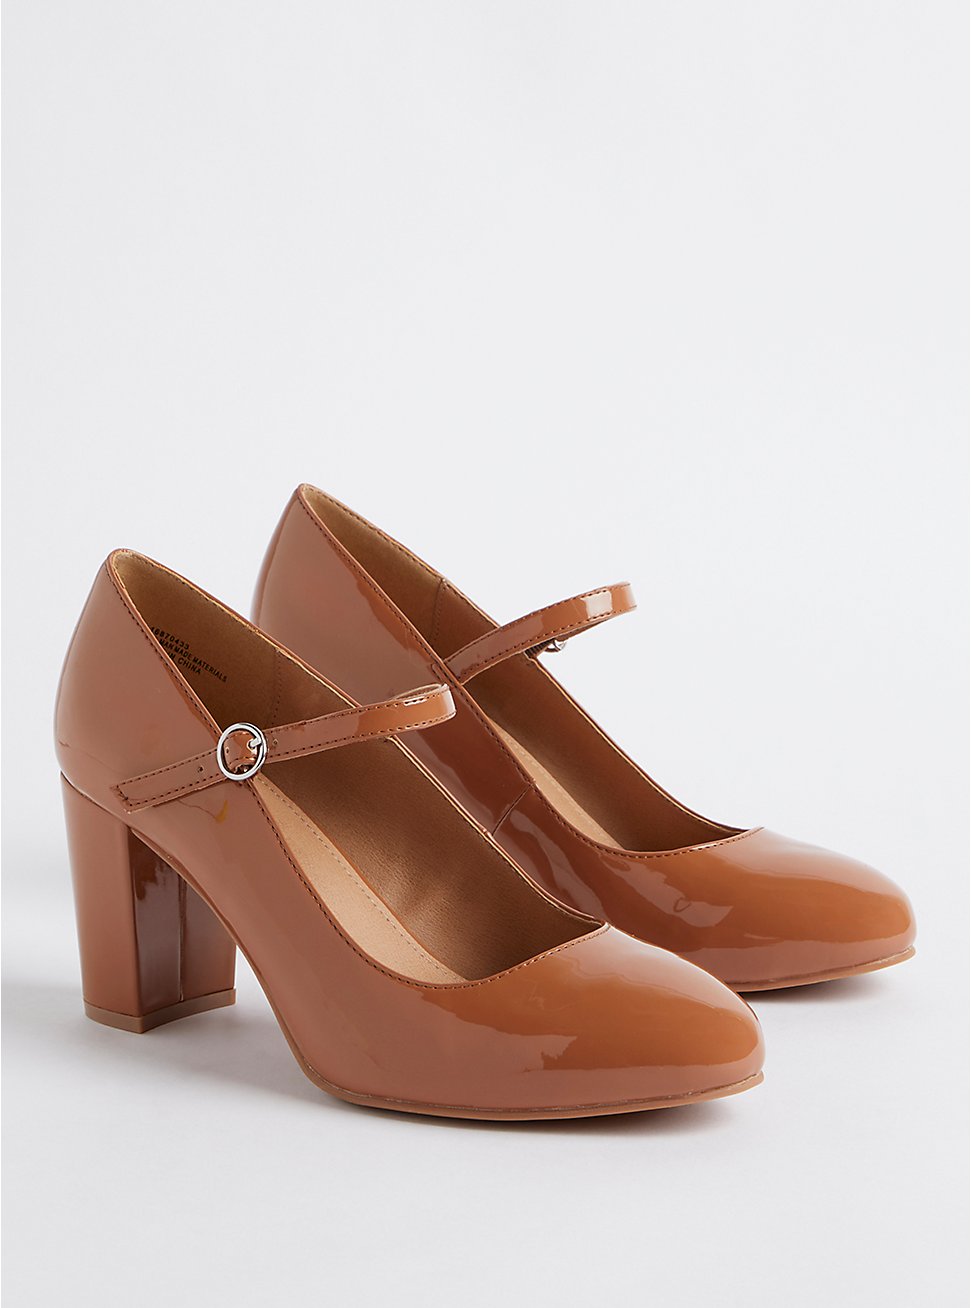 Mary Jane Pump - Patent Leather Brown Blush (WW), BROWN, hi-res